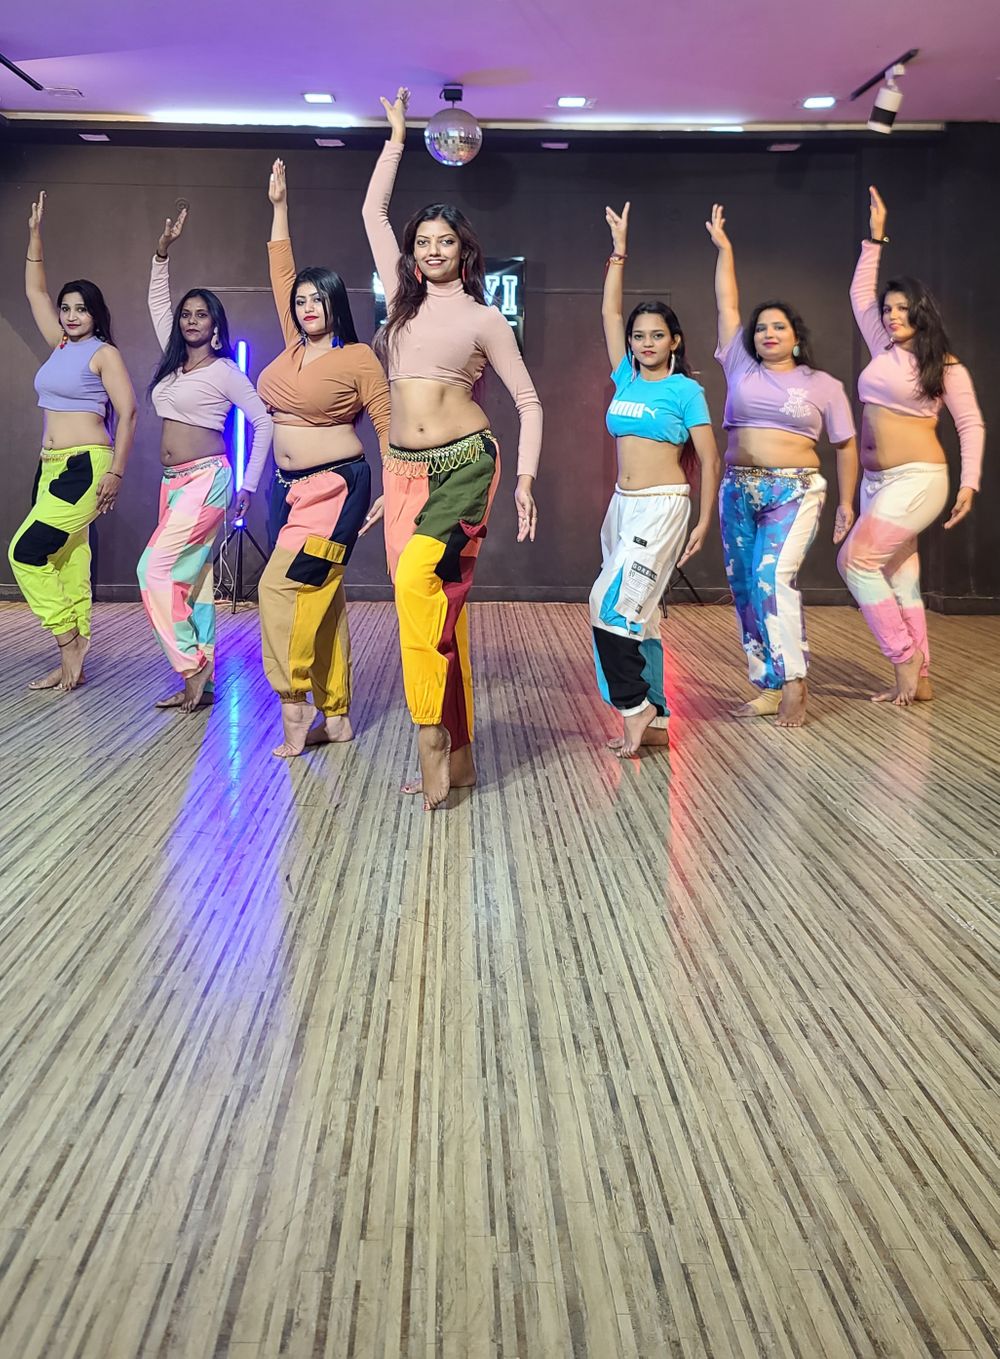 Photo From Latest - By Shivi Dance Studio